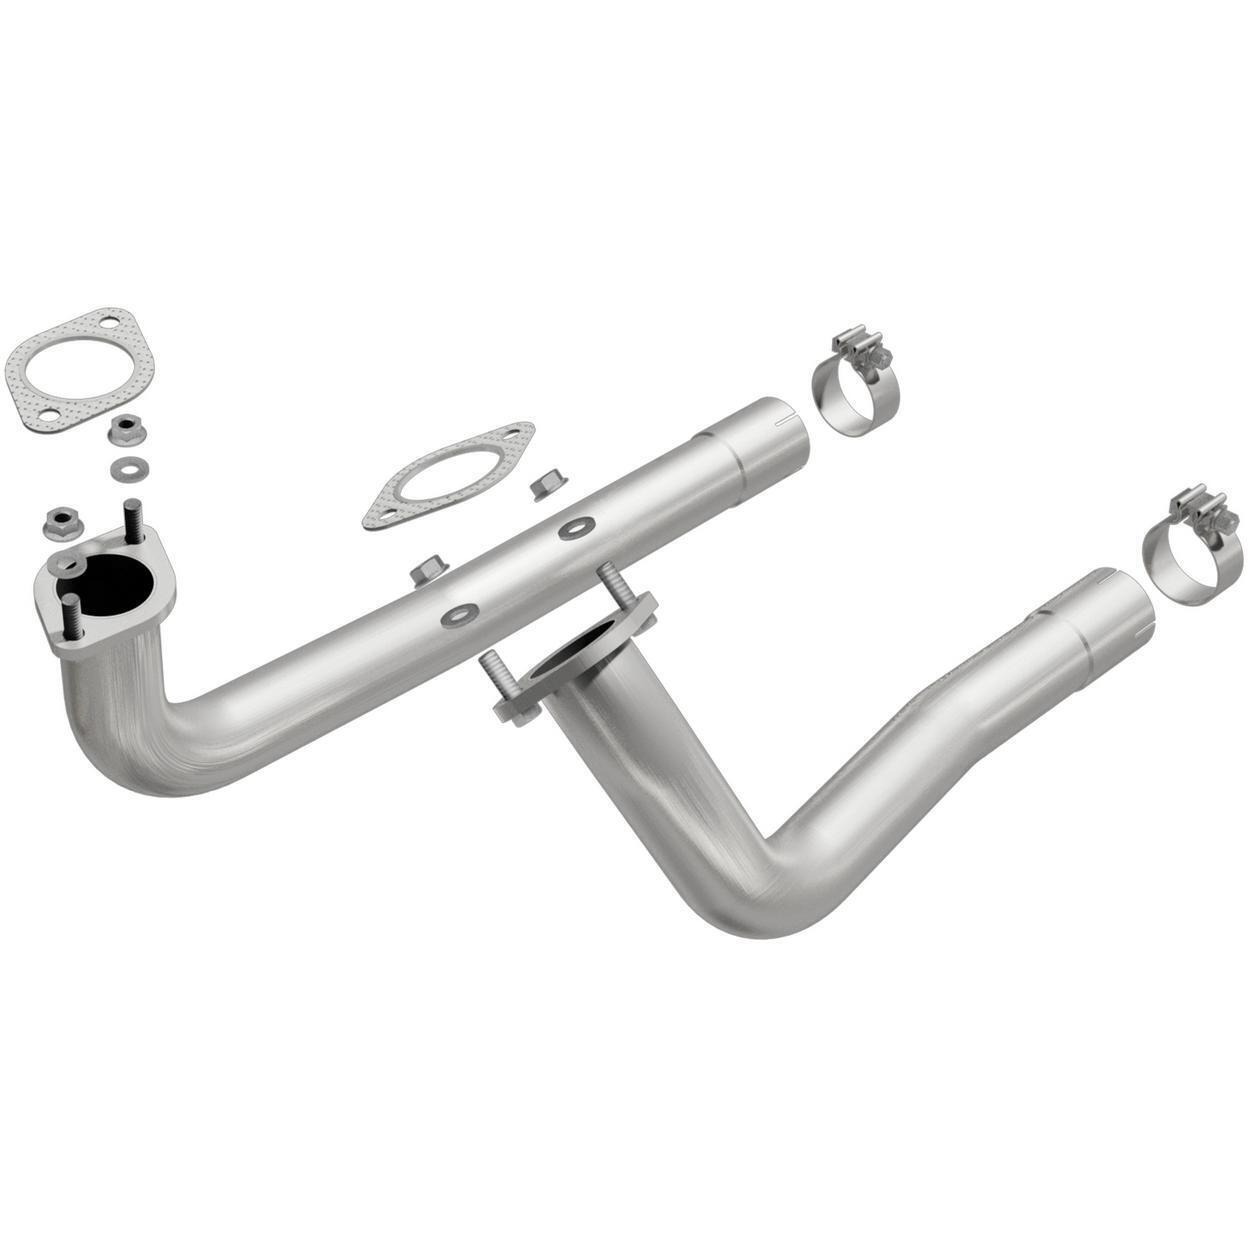 Exhaust and Tail Pipes for 1967-1970 Dodge Coronet 7.2L V8 GAS OHV